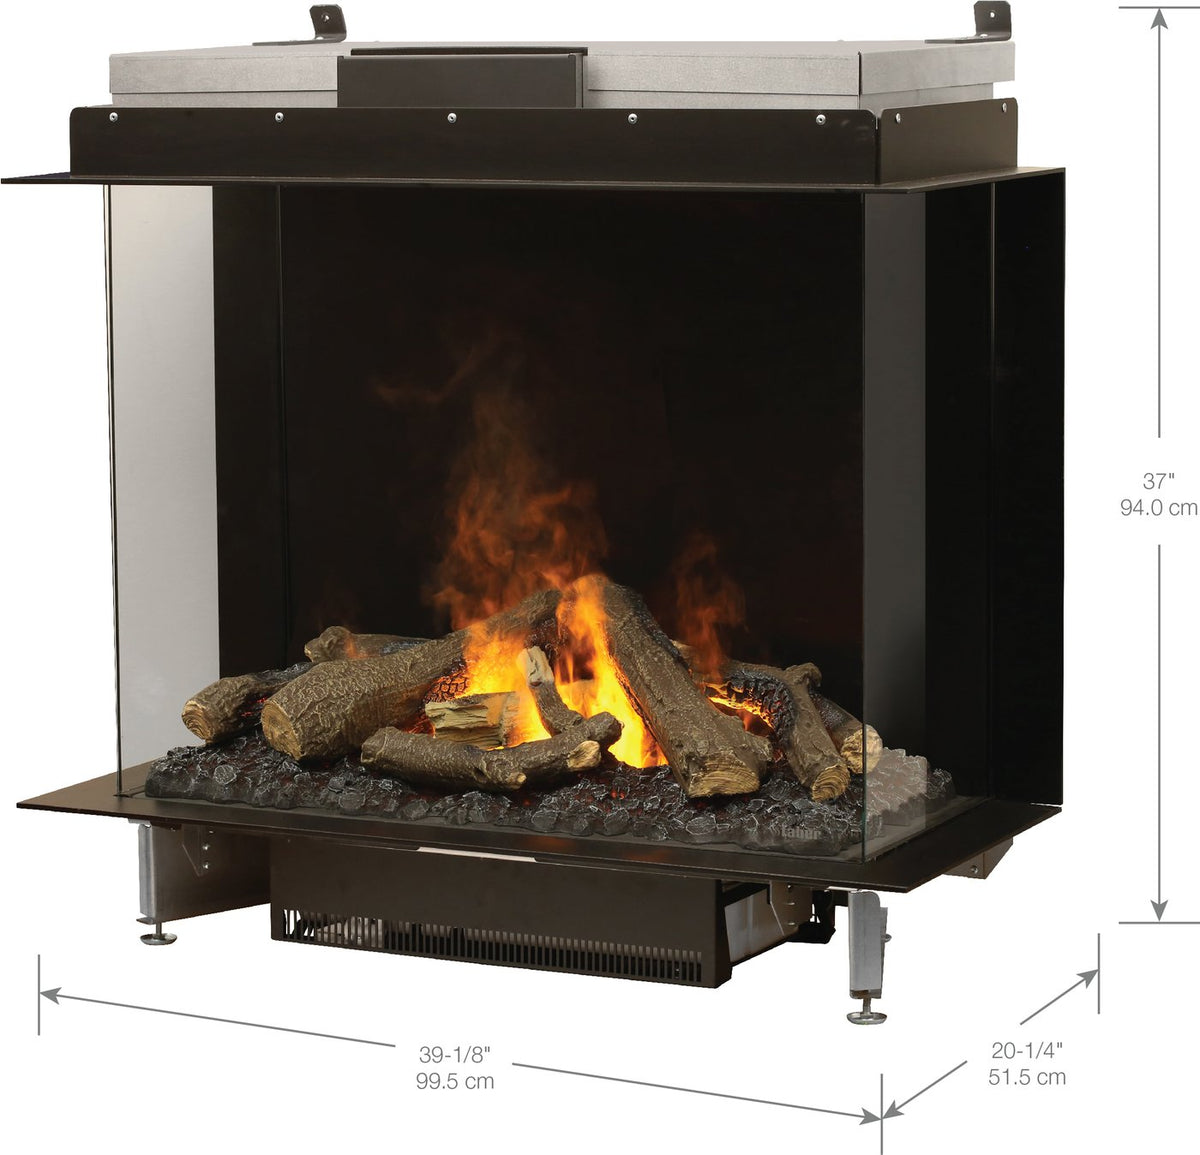 Dimplex Faber e-MatriX Three-Sided Built-in Water Vapor Electric Fireplace